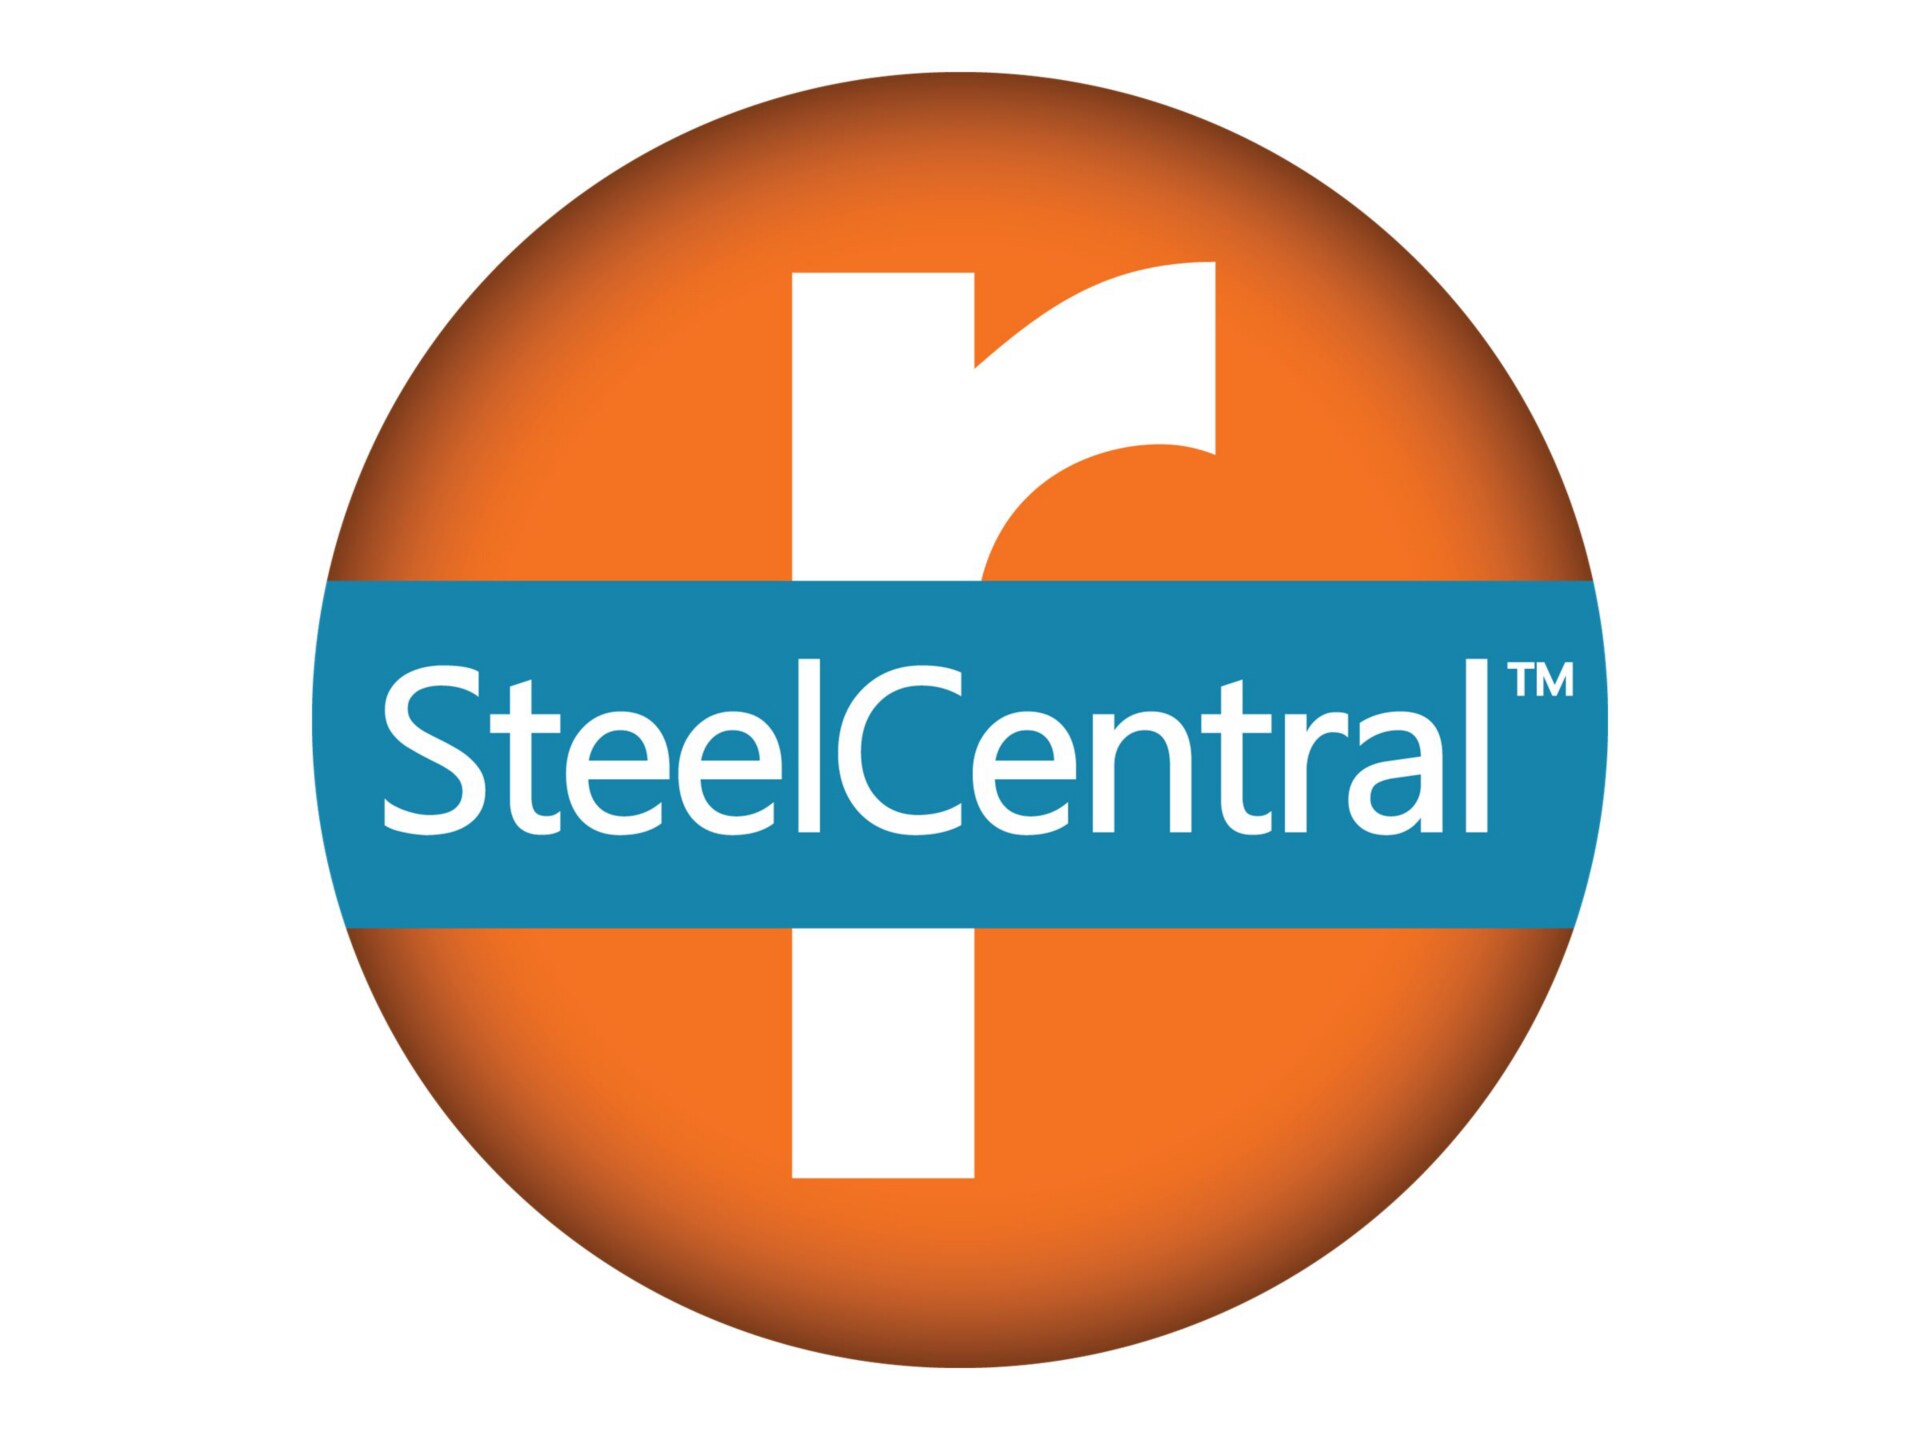 SteelCentral NetProfiler Virtual Edition - upgrade license - 800000 flows per minute